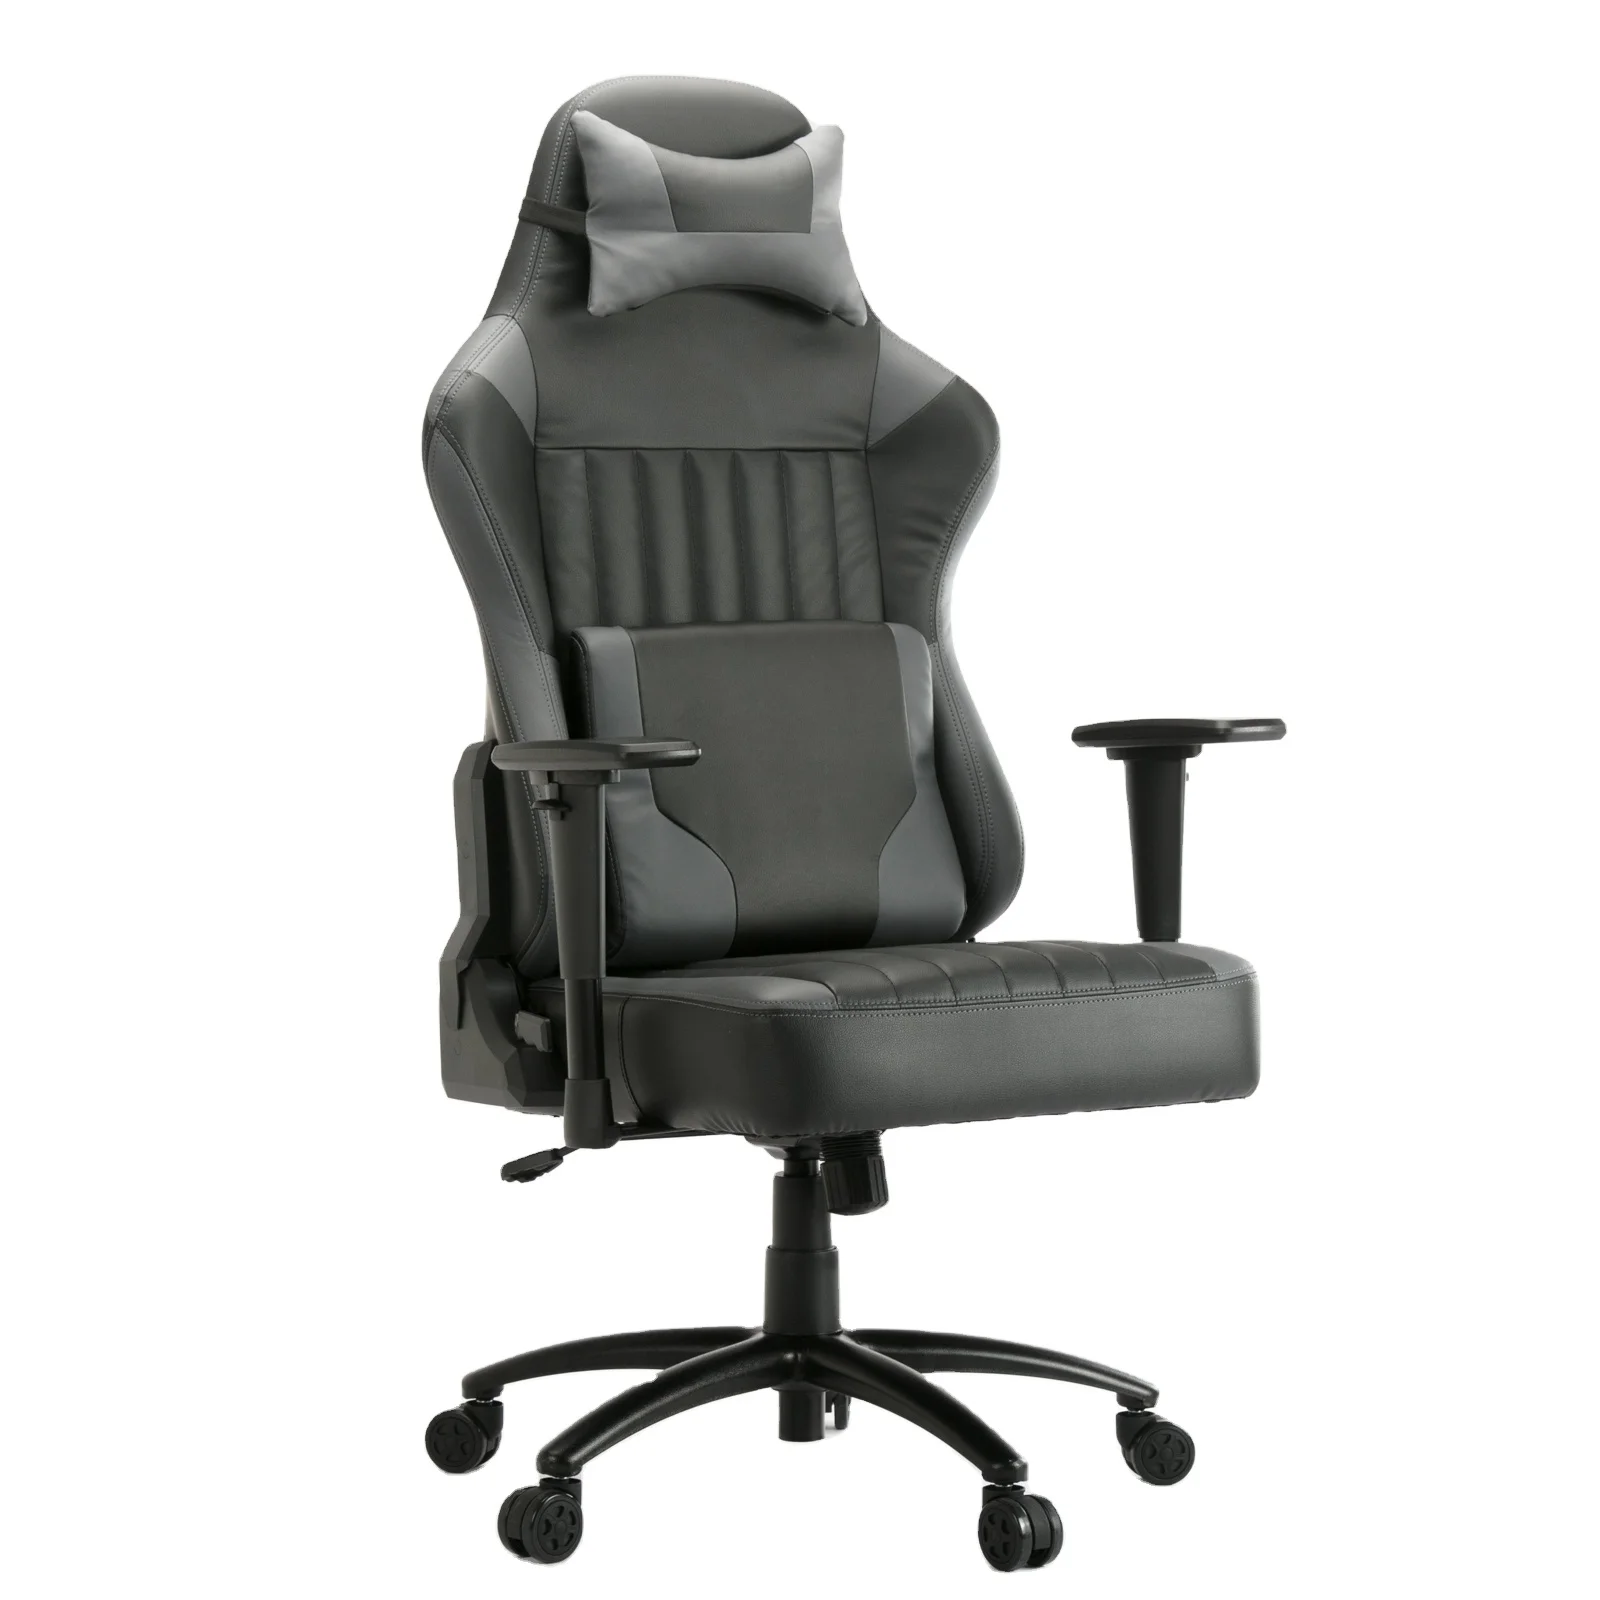 

USA free shipping Ergonomic Swivel Gaming Chair,High-Back Leather chair with Lumbar support